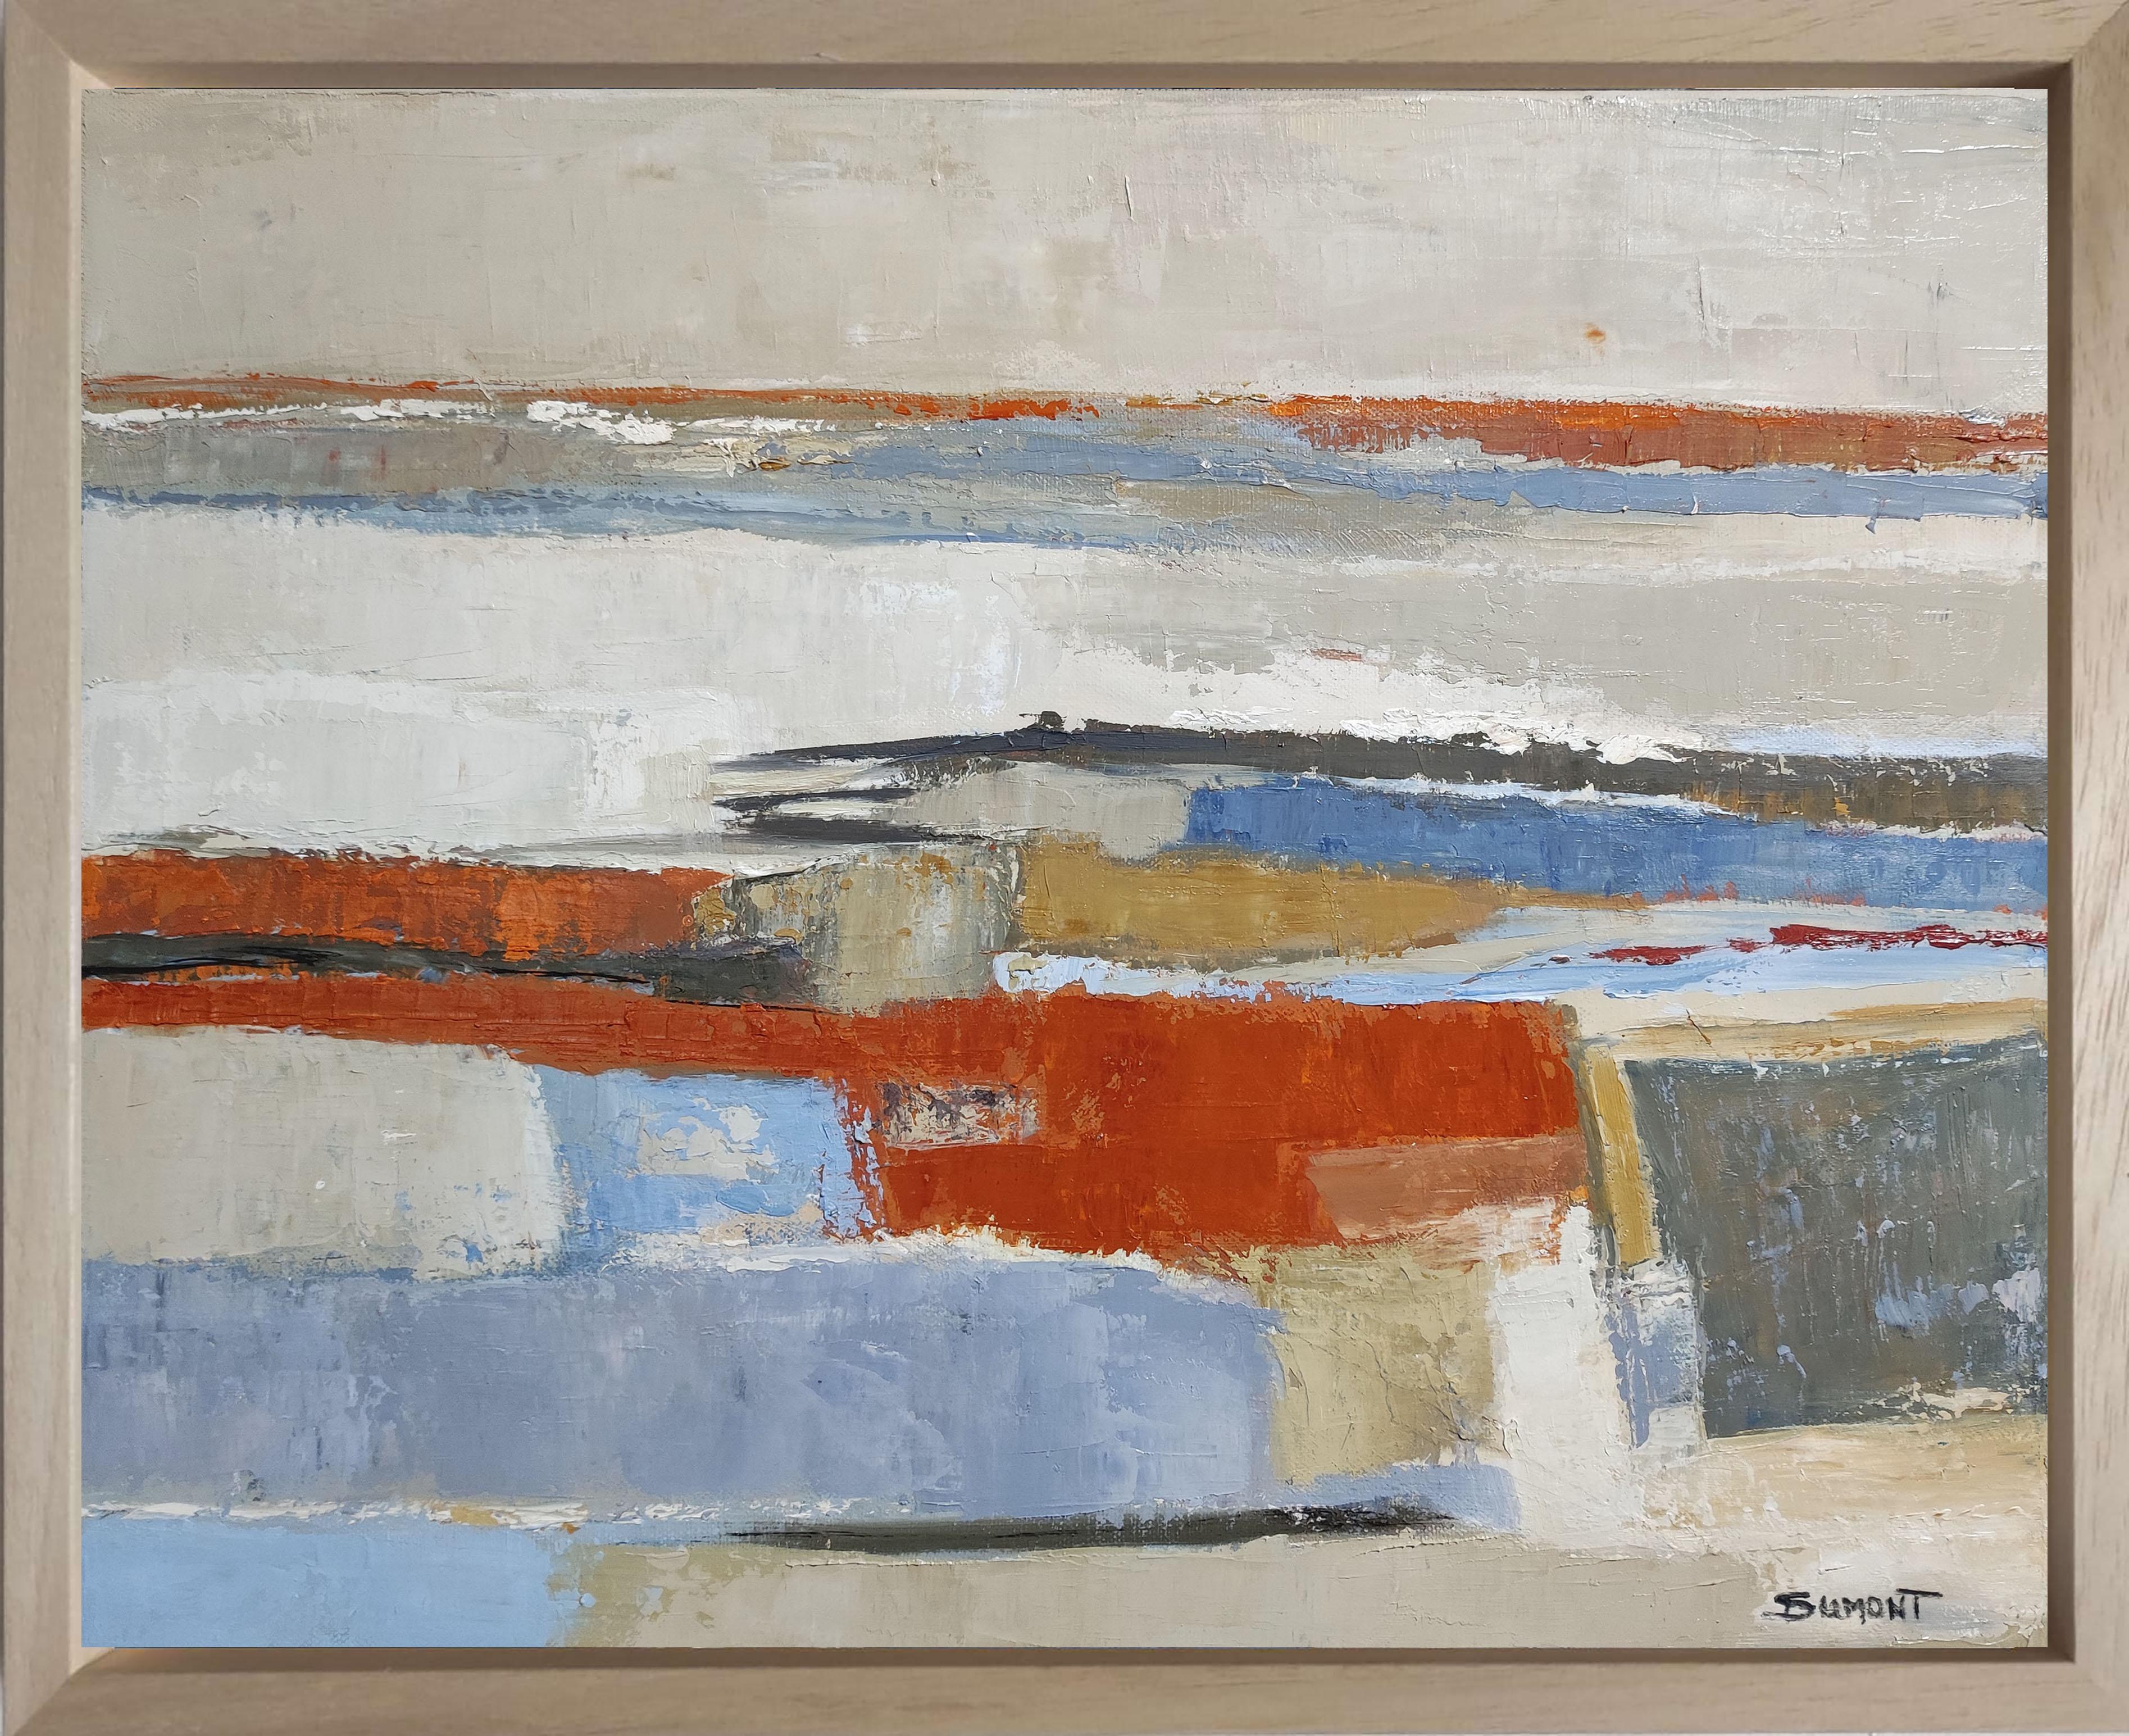 SOPHIE DUMONT Abstract Painting - Lacis, abstract landscape, oil on canvas, contemporary art, fields, blue, orange